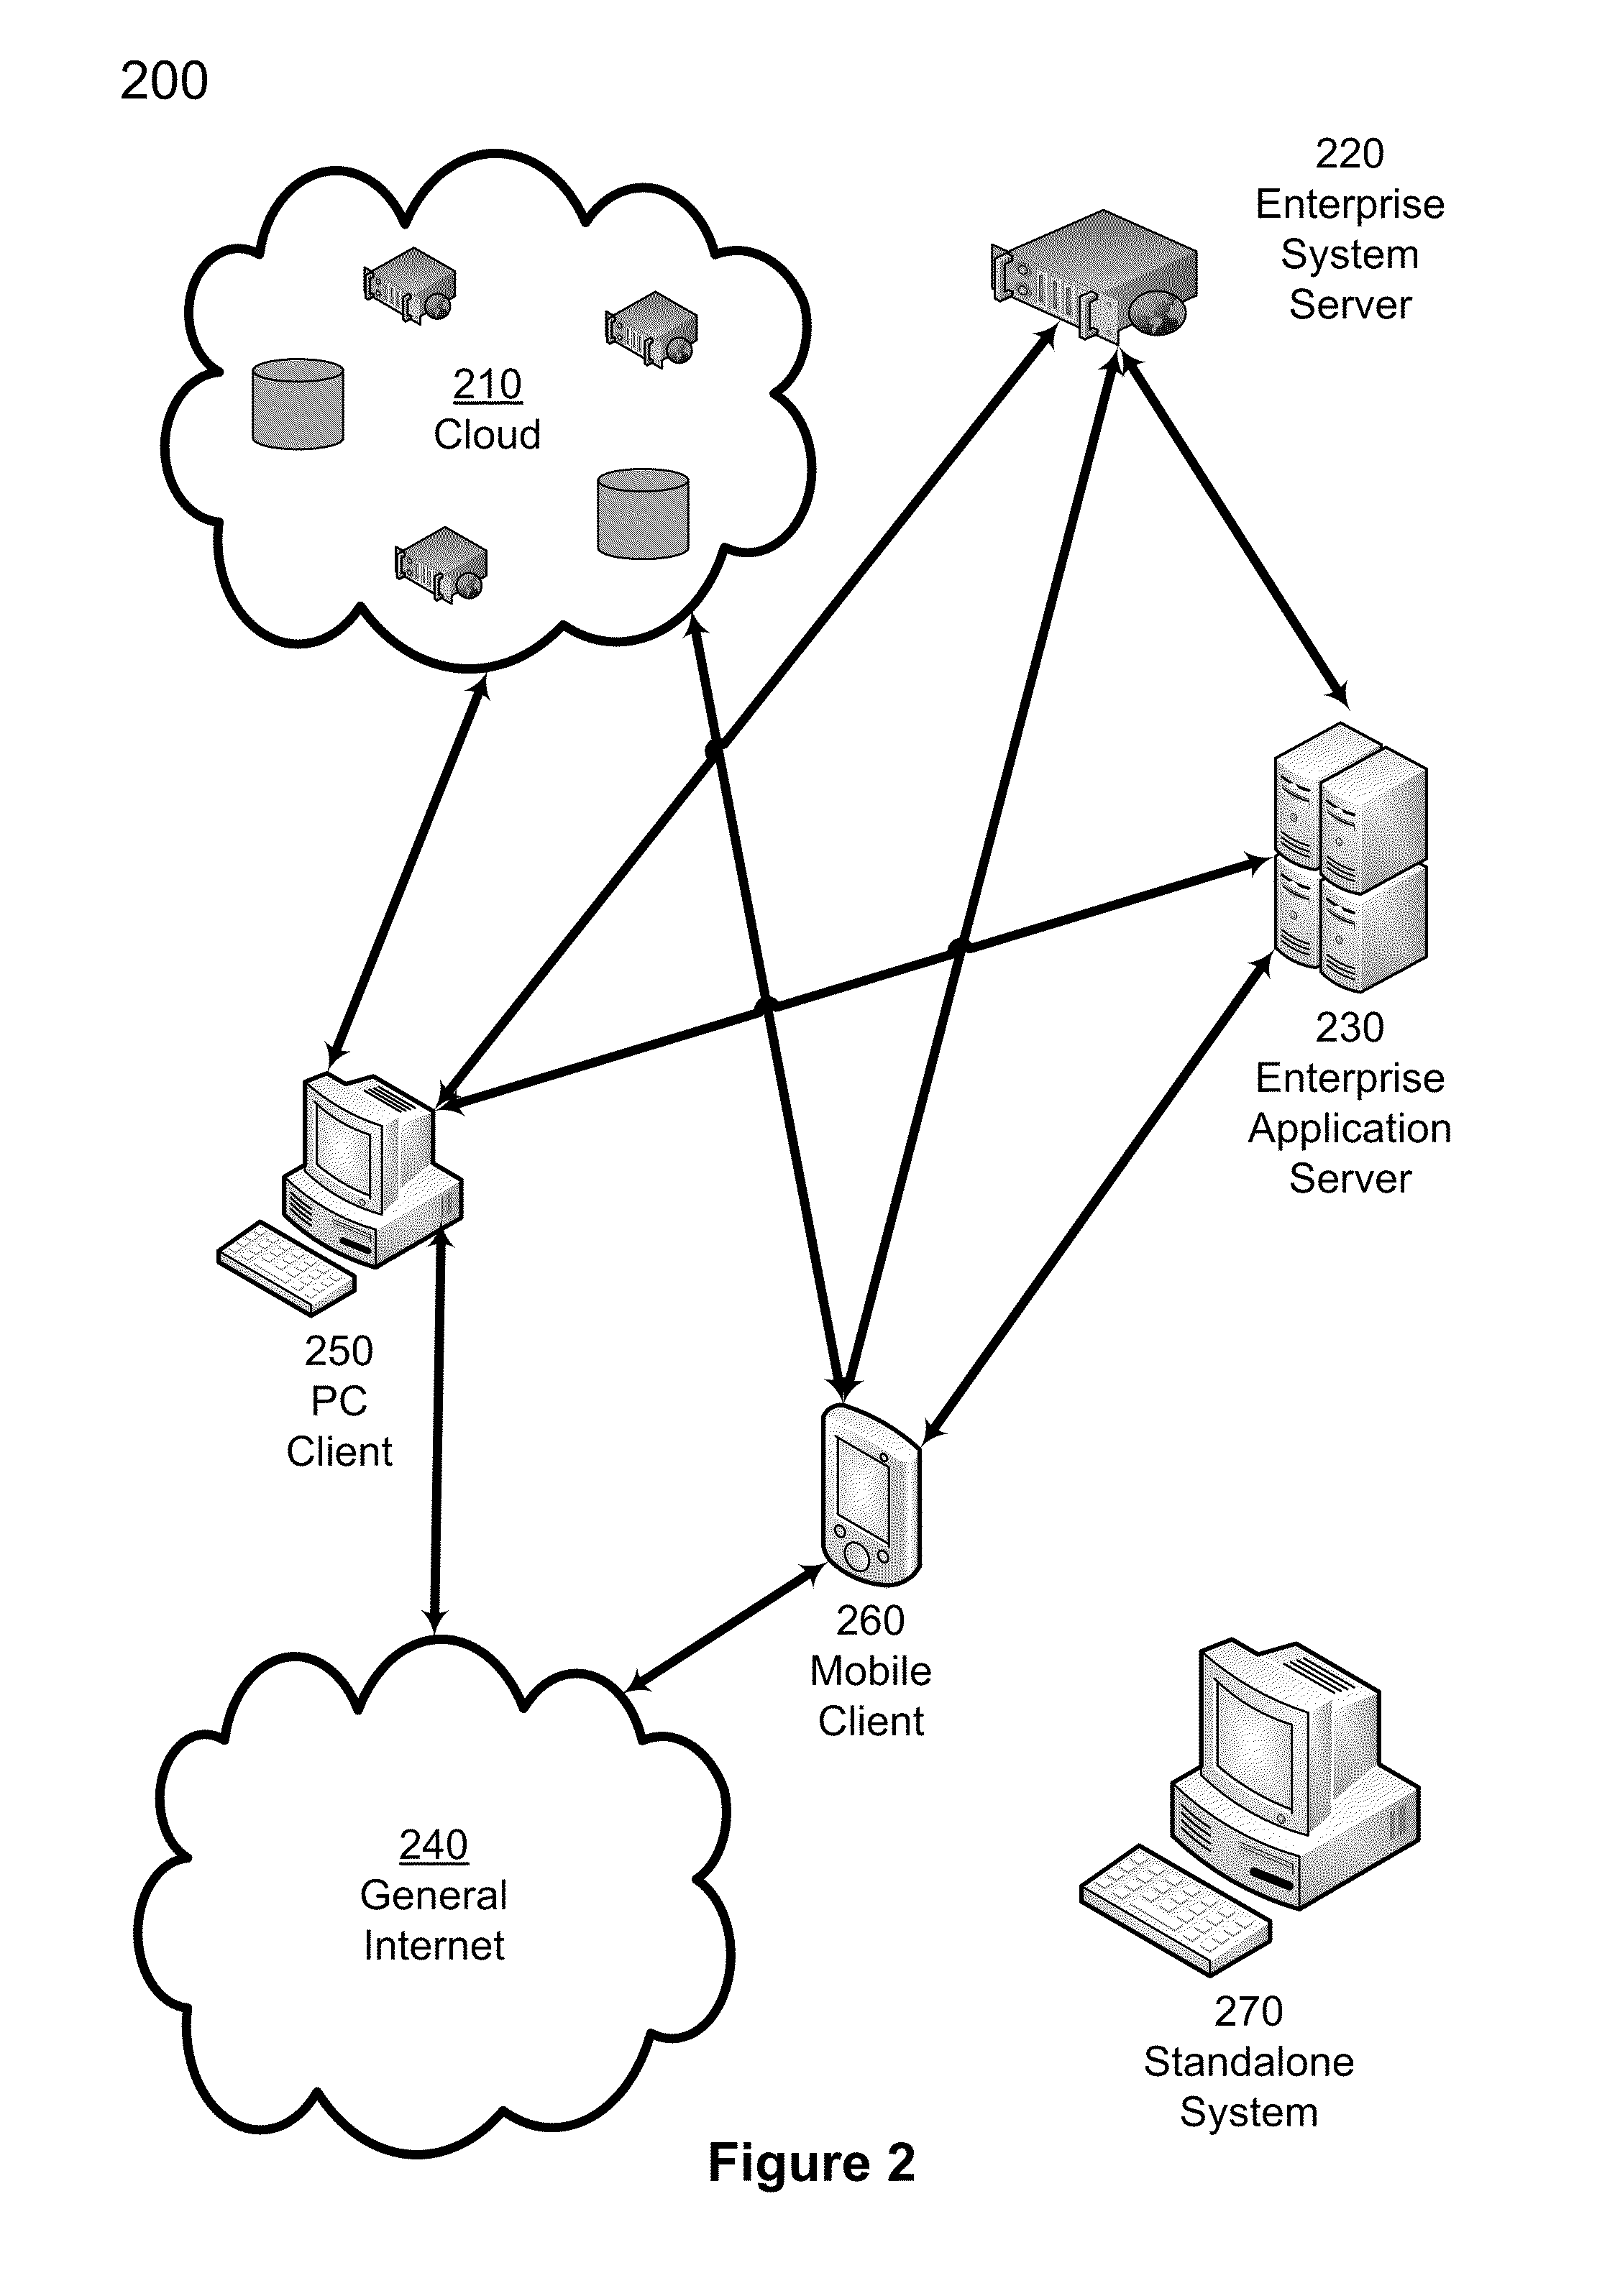 Distributed platform for network analysis